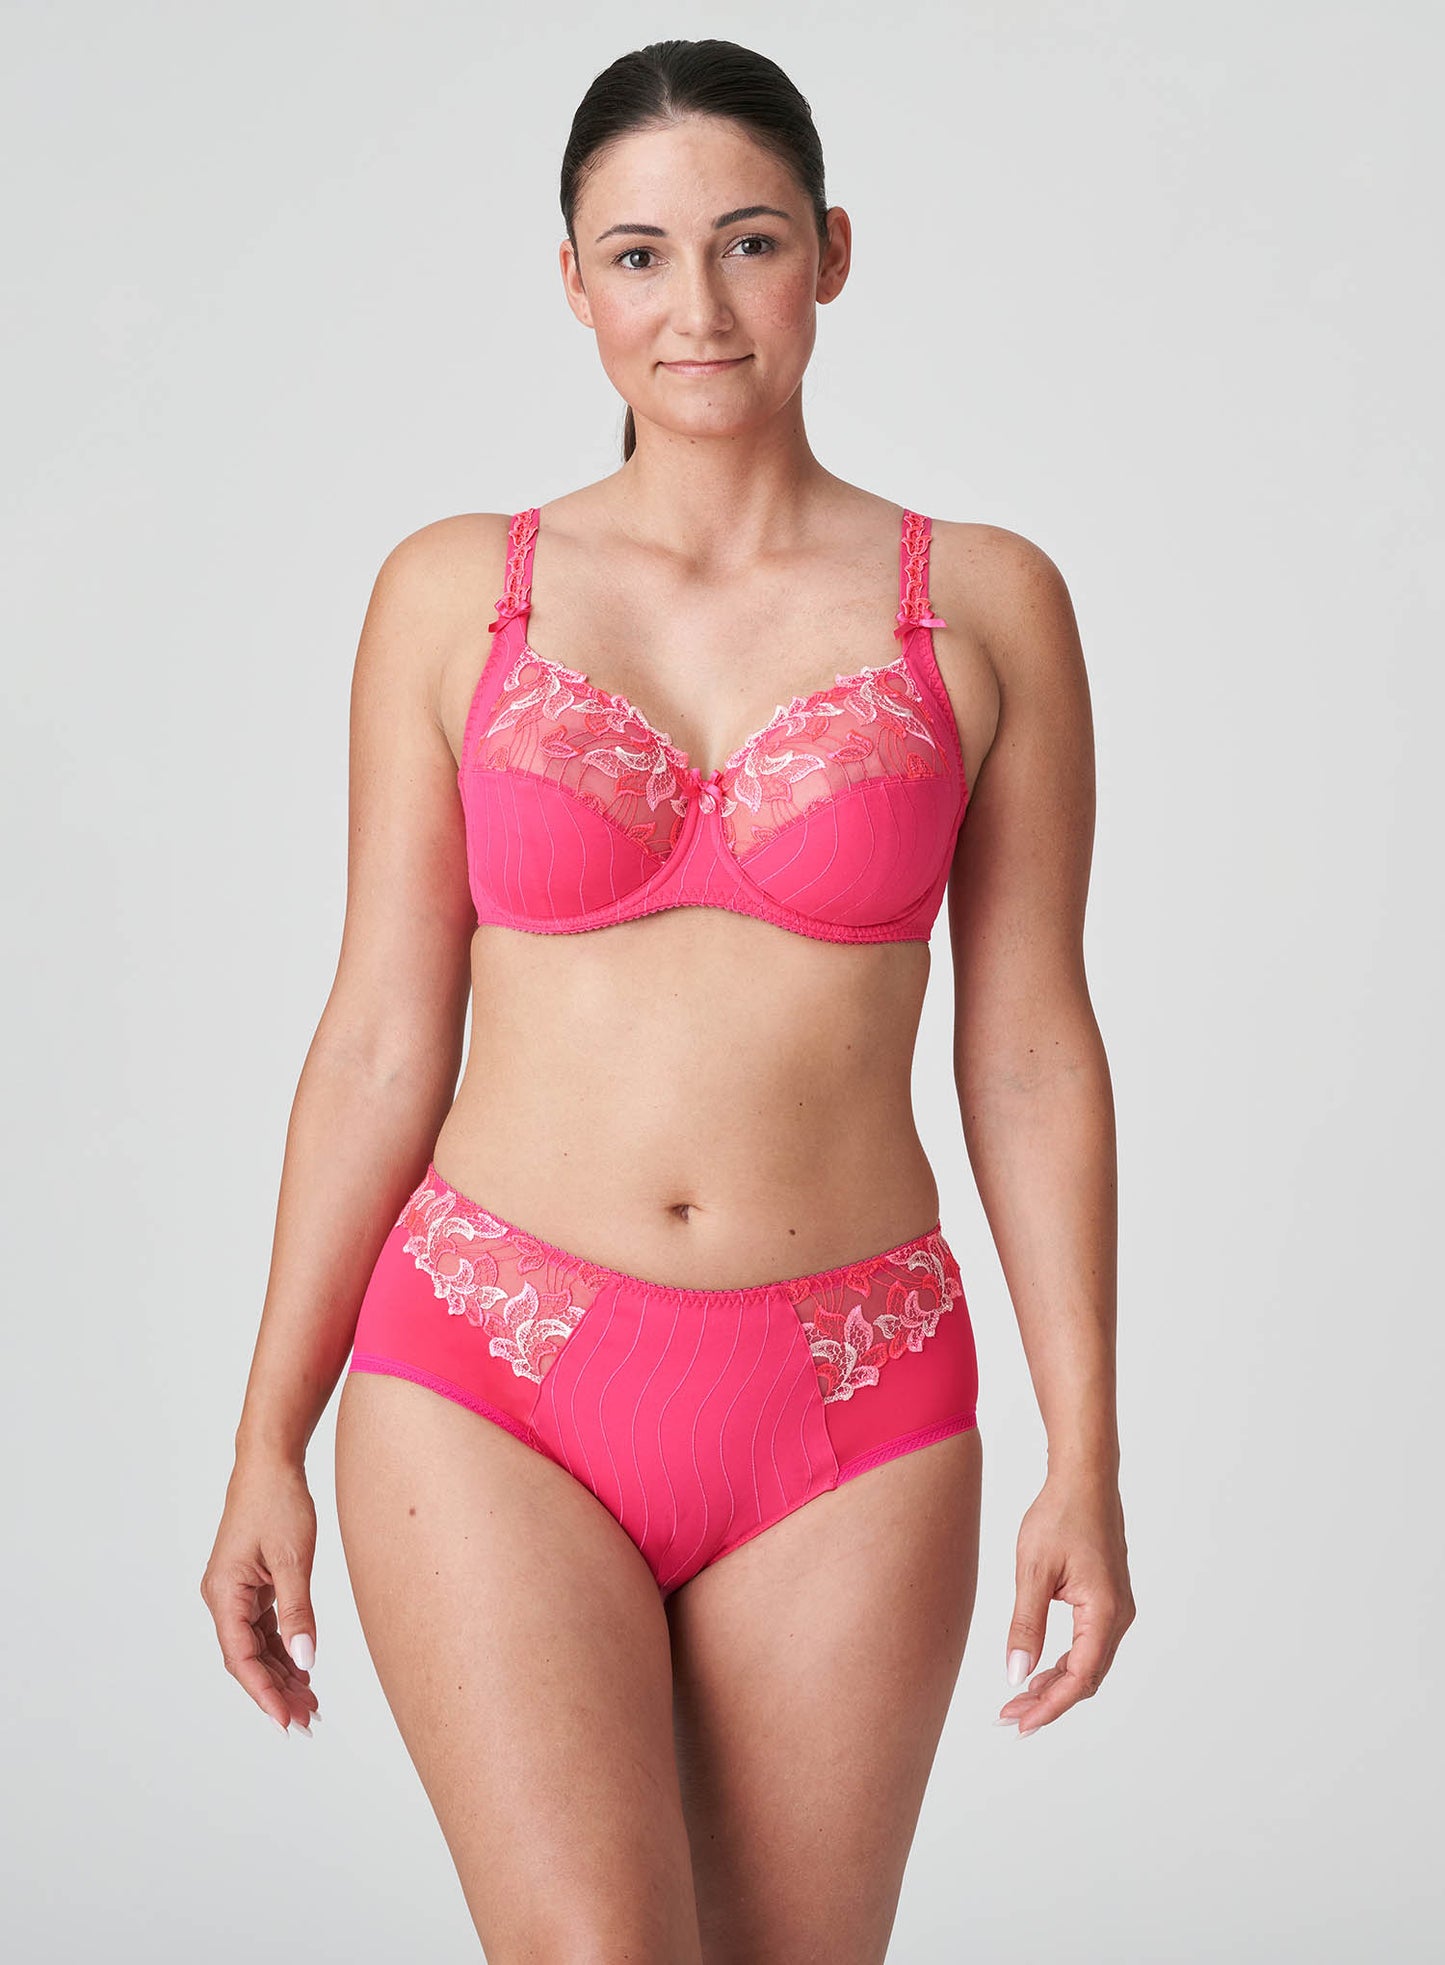 PrimaDonna: Deauville Full Cup Bra Amour